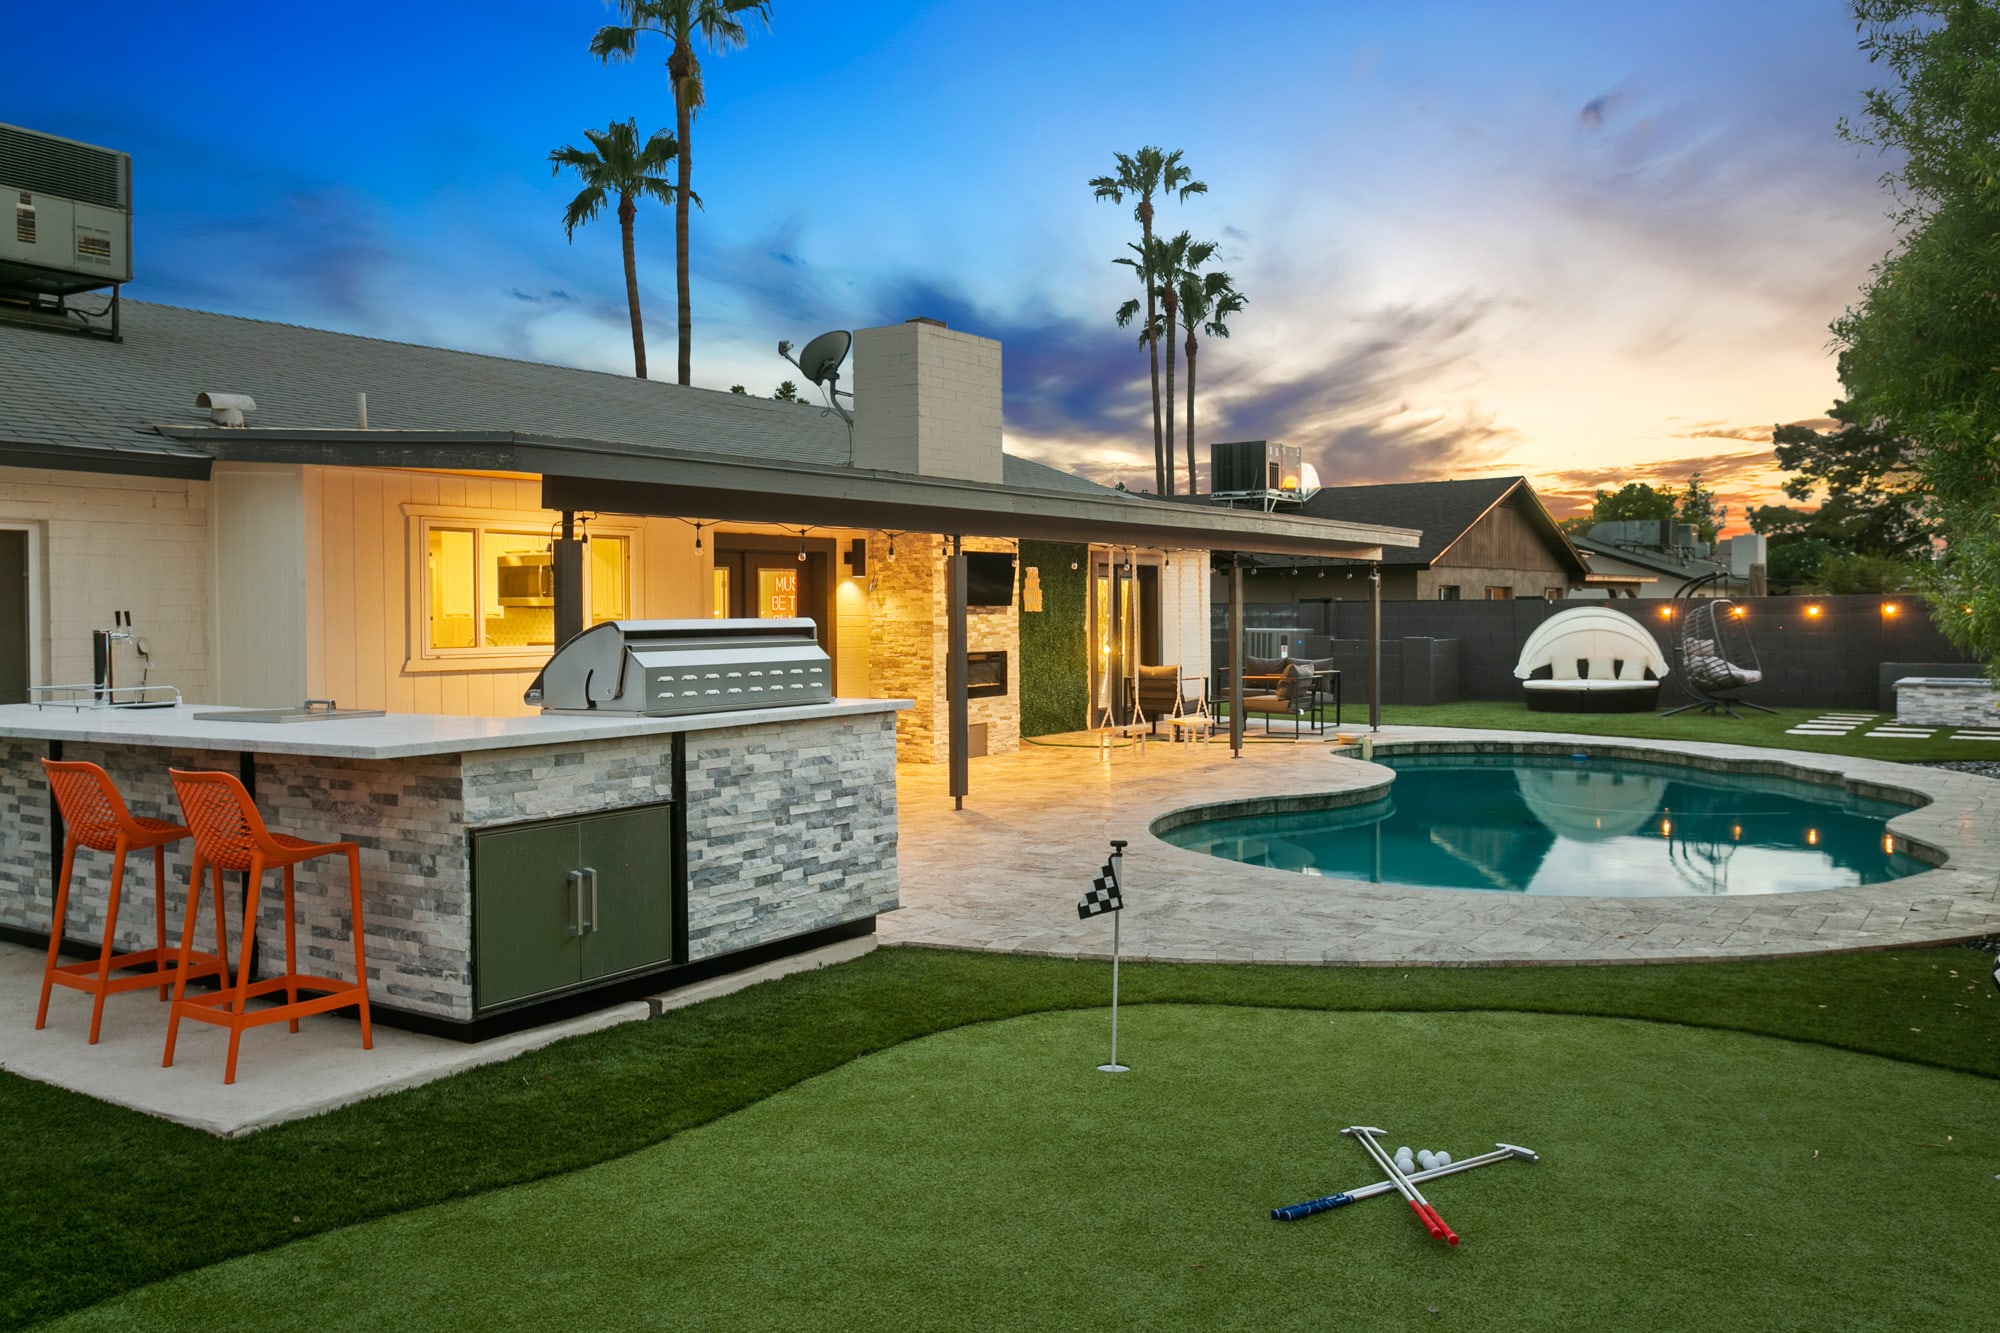 Your paradise backyard- putt putt, firepit, wet bar, BBQ Grill, cornhole, connect 4, and tons of outdoor seating